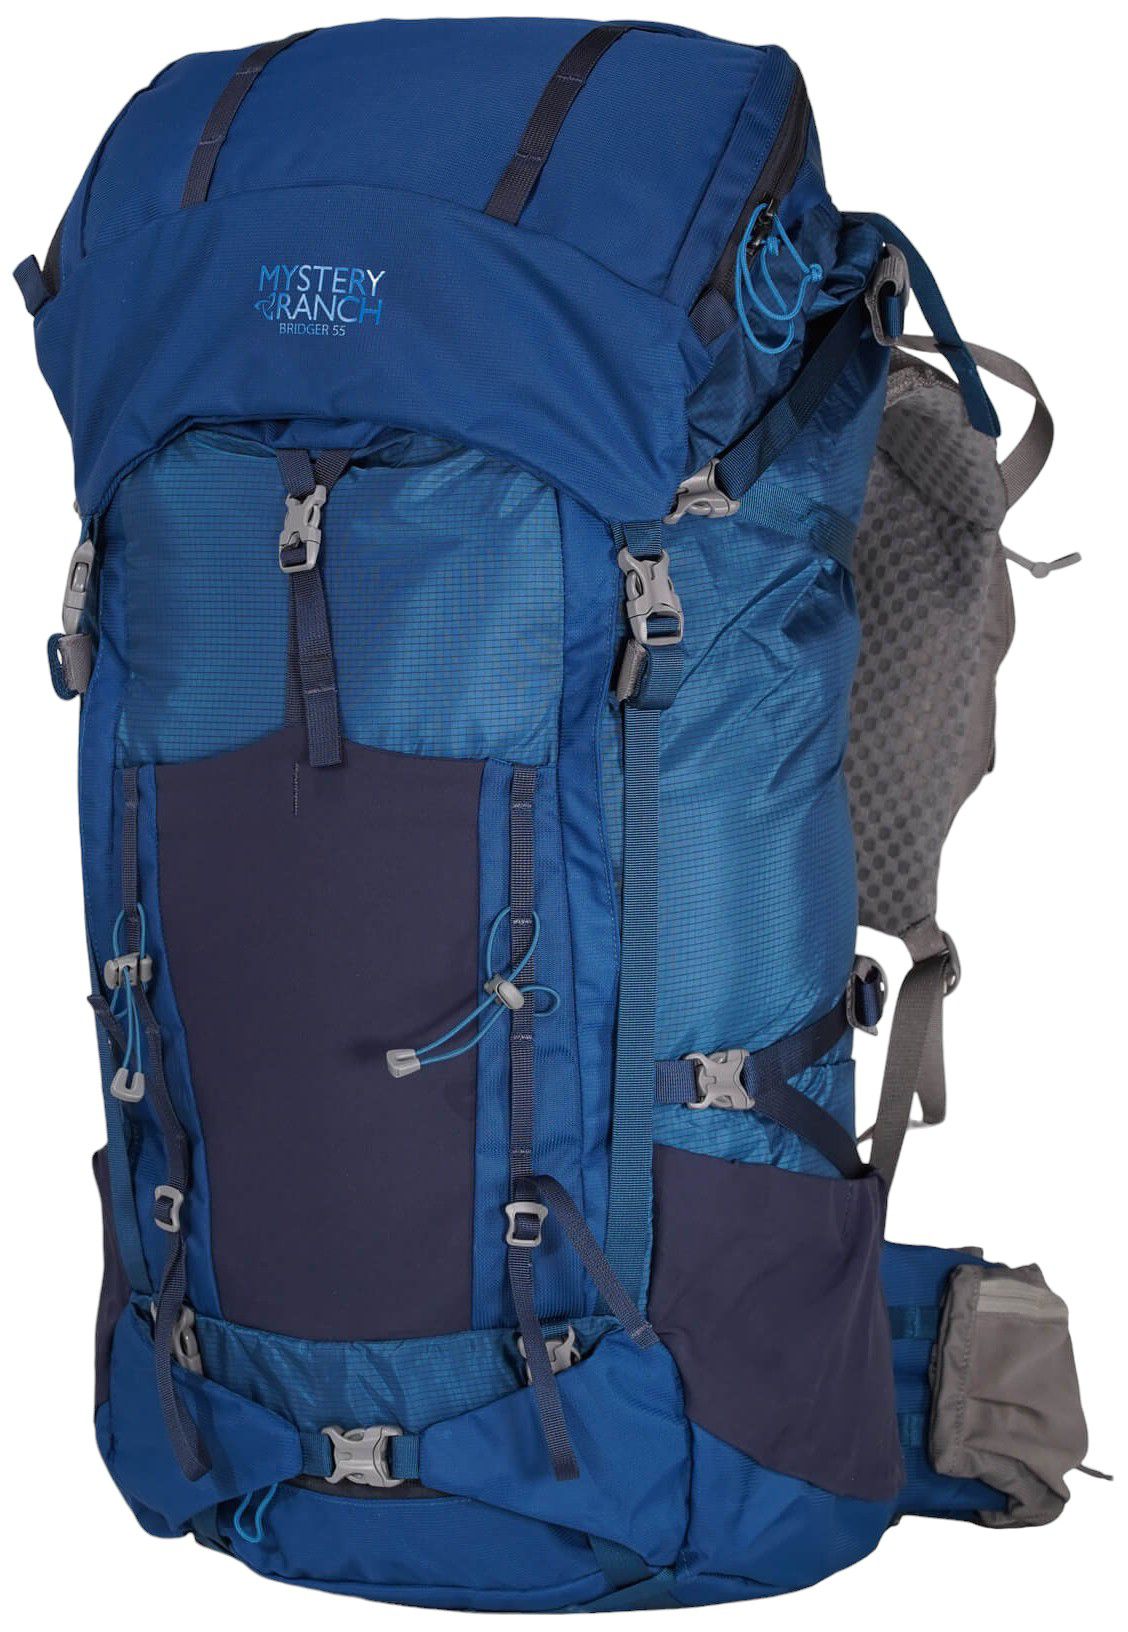 Photos - Knife / Multitool Mystery Ranch Backpack Bridger 55L Frame Pack, Men's, Small, Del Mar 21ZZF 